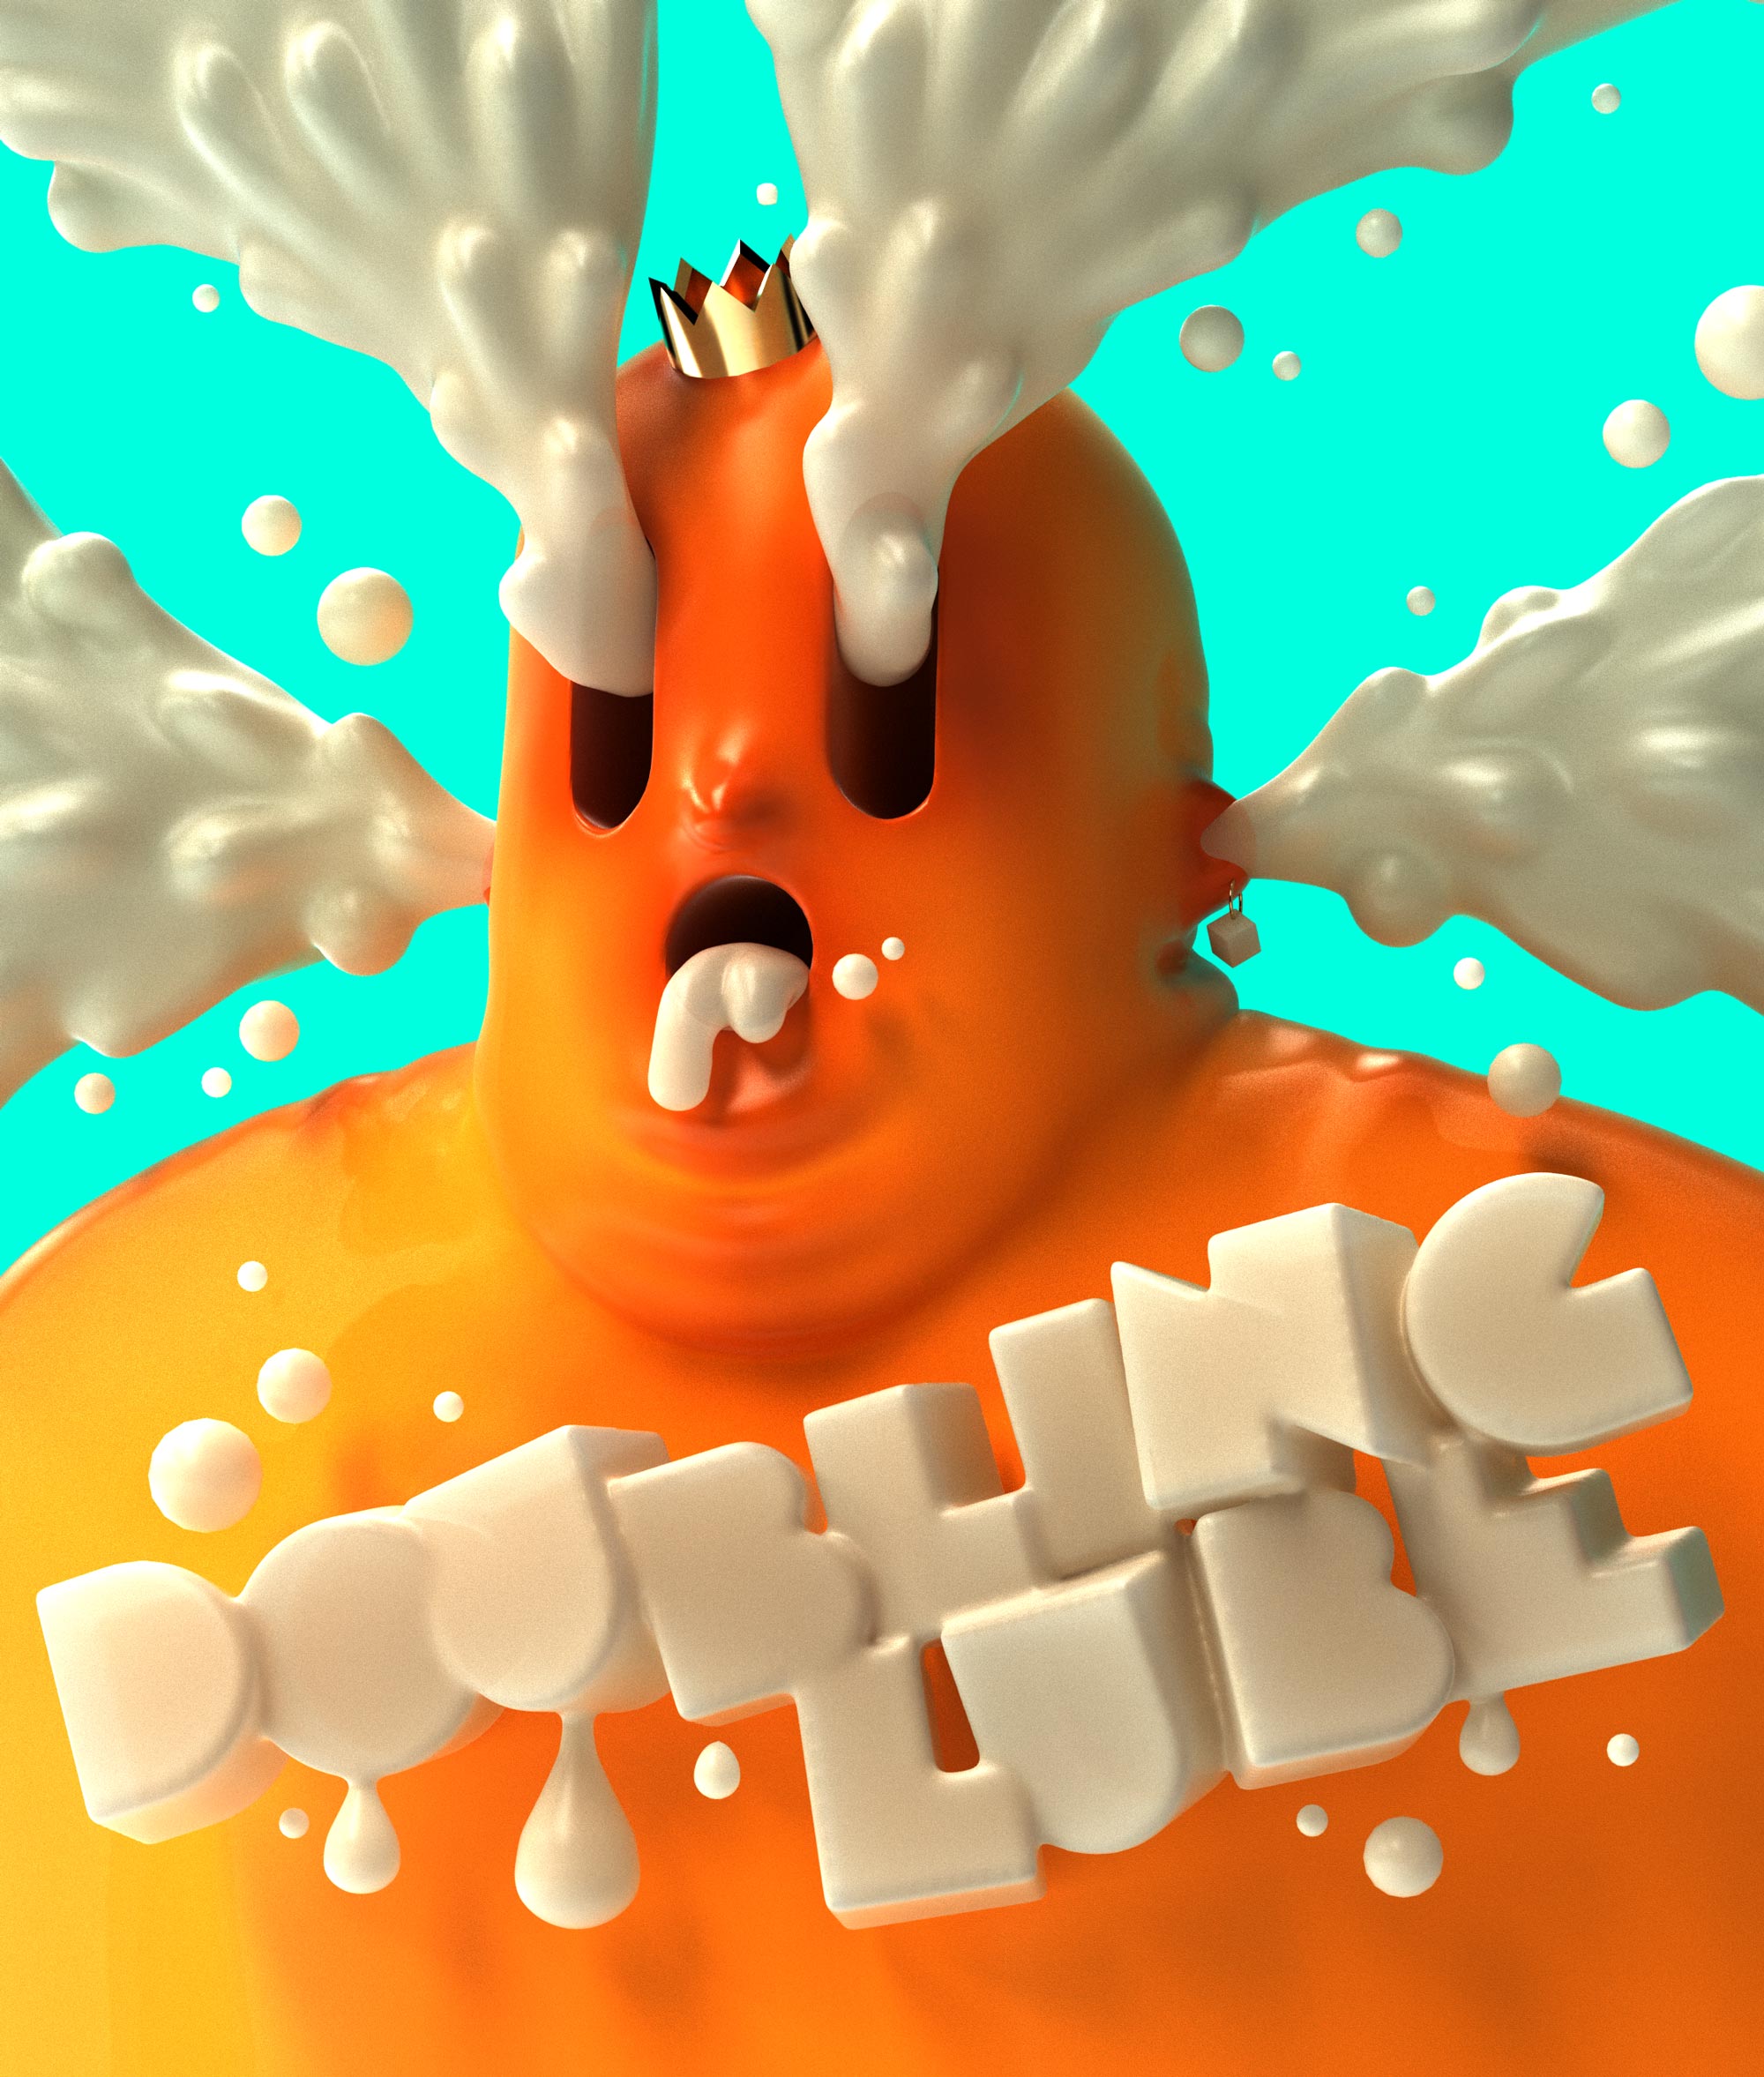 image of a card with a orange creature with goo spewing out